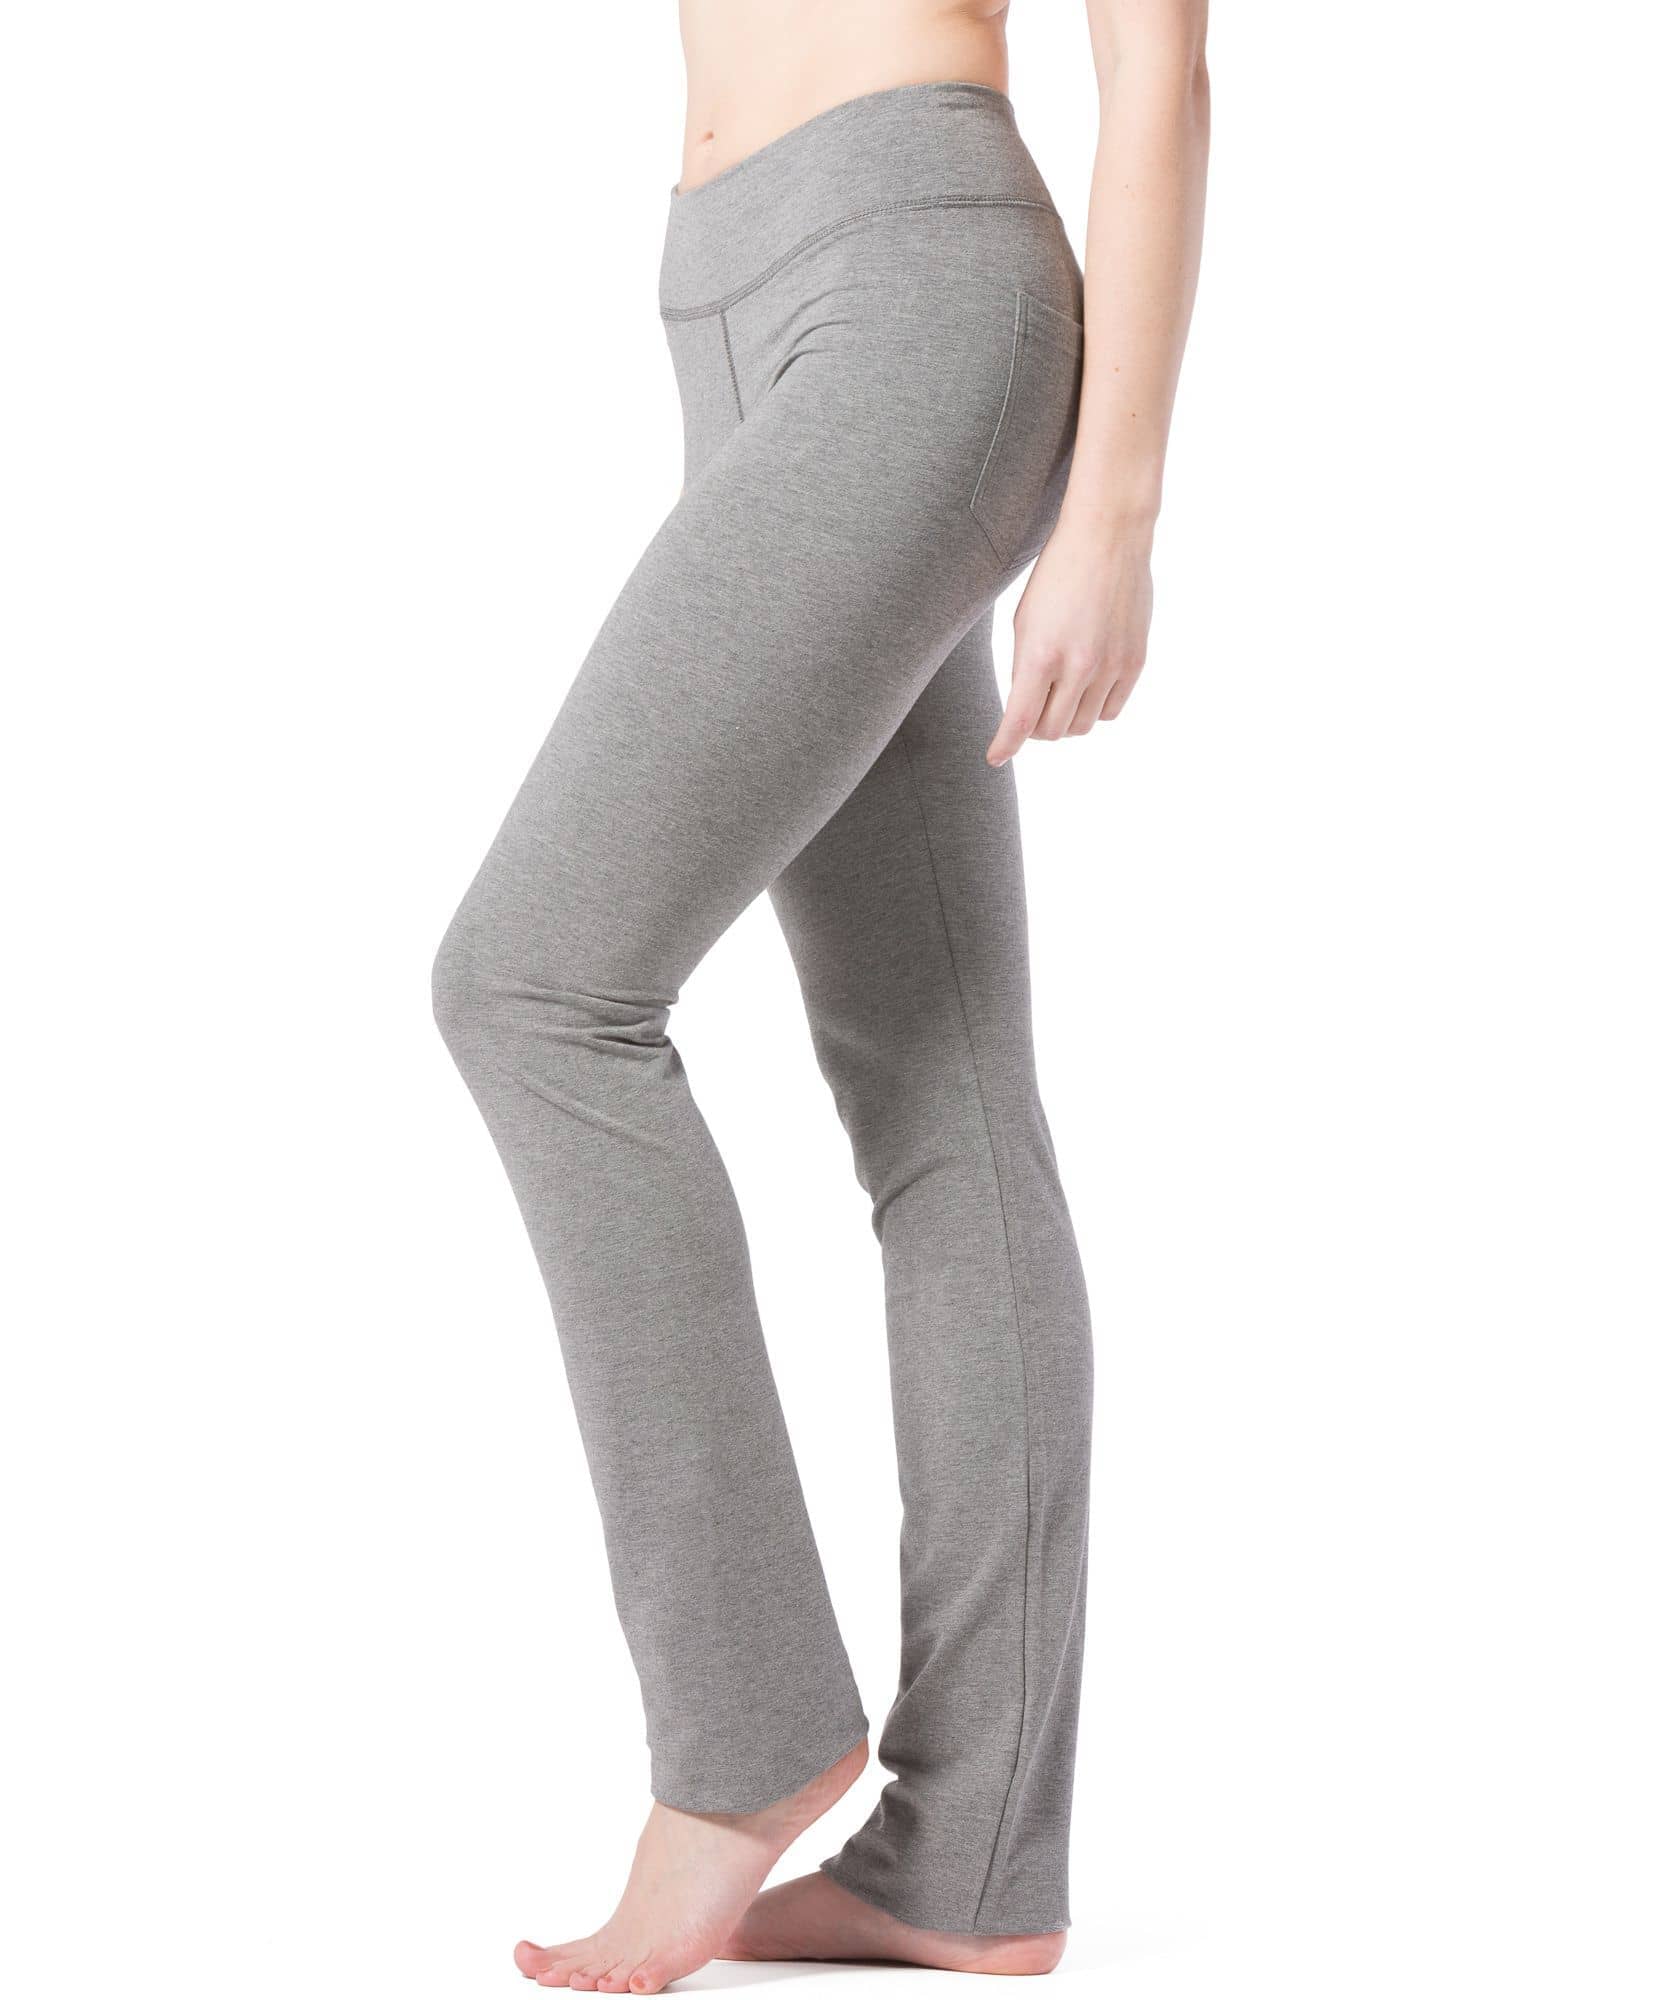 bootcut yoga pant with side pockets